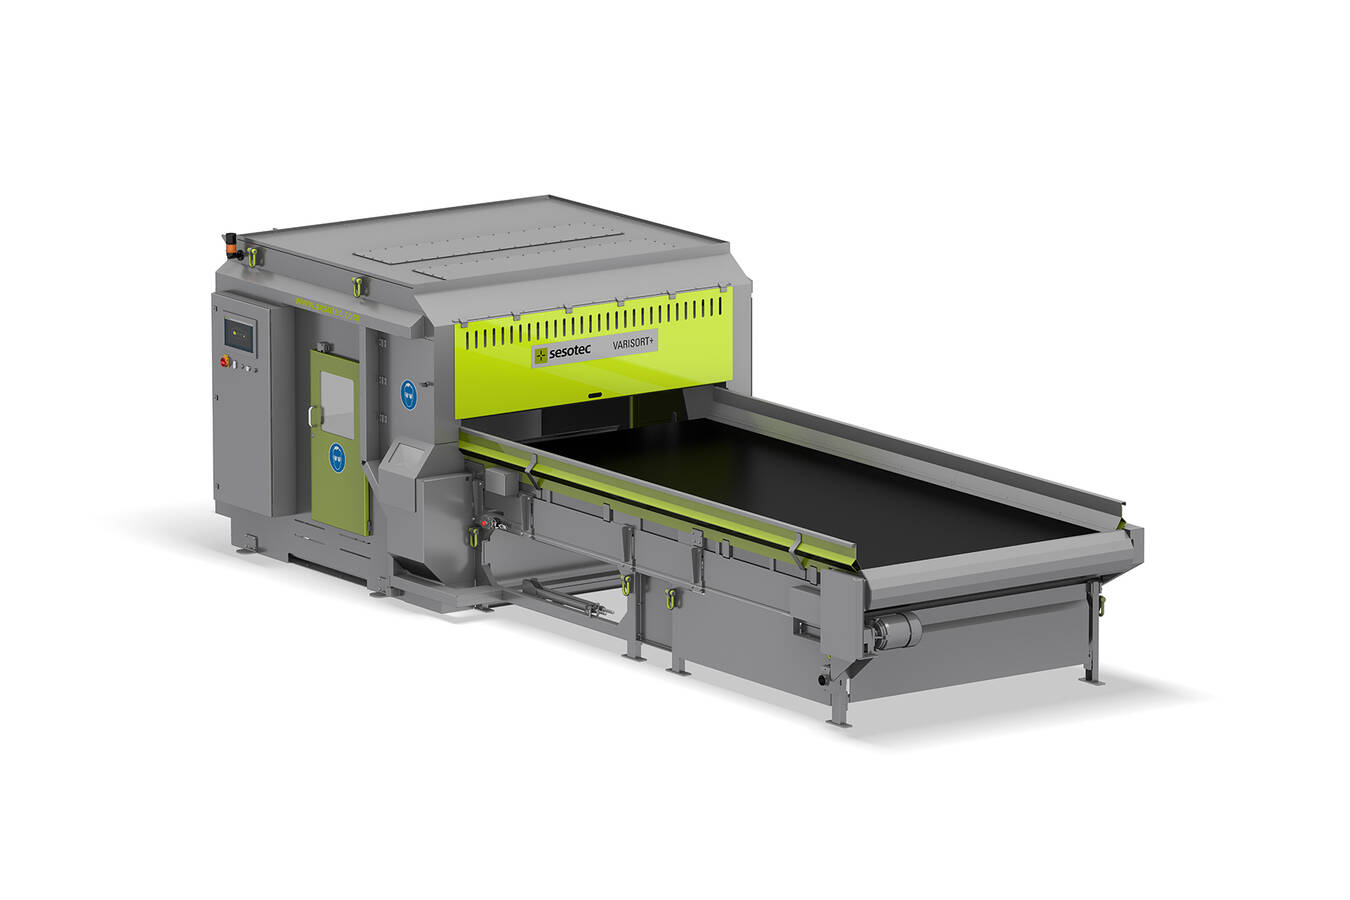 VARISORT+ detects and separates plastic types, colors, and shapes, as well as metals and foreign objects, with the utmost accuracy and reliability in order to provide the best possible sorting results, even with poor-quality materials. More information: w